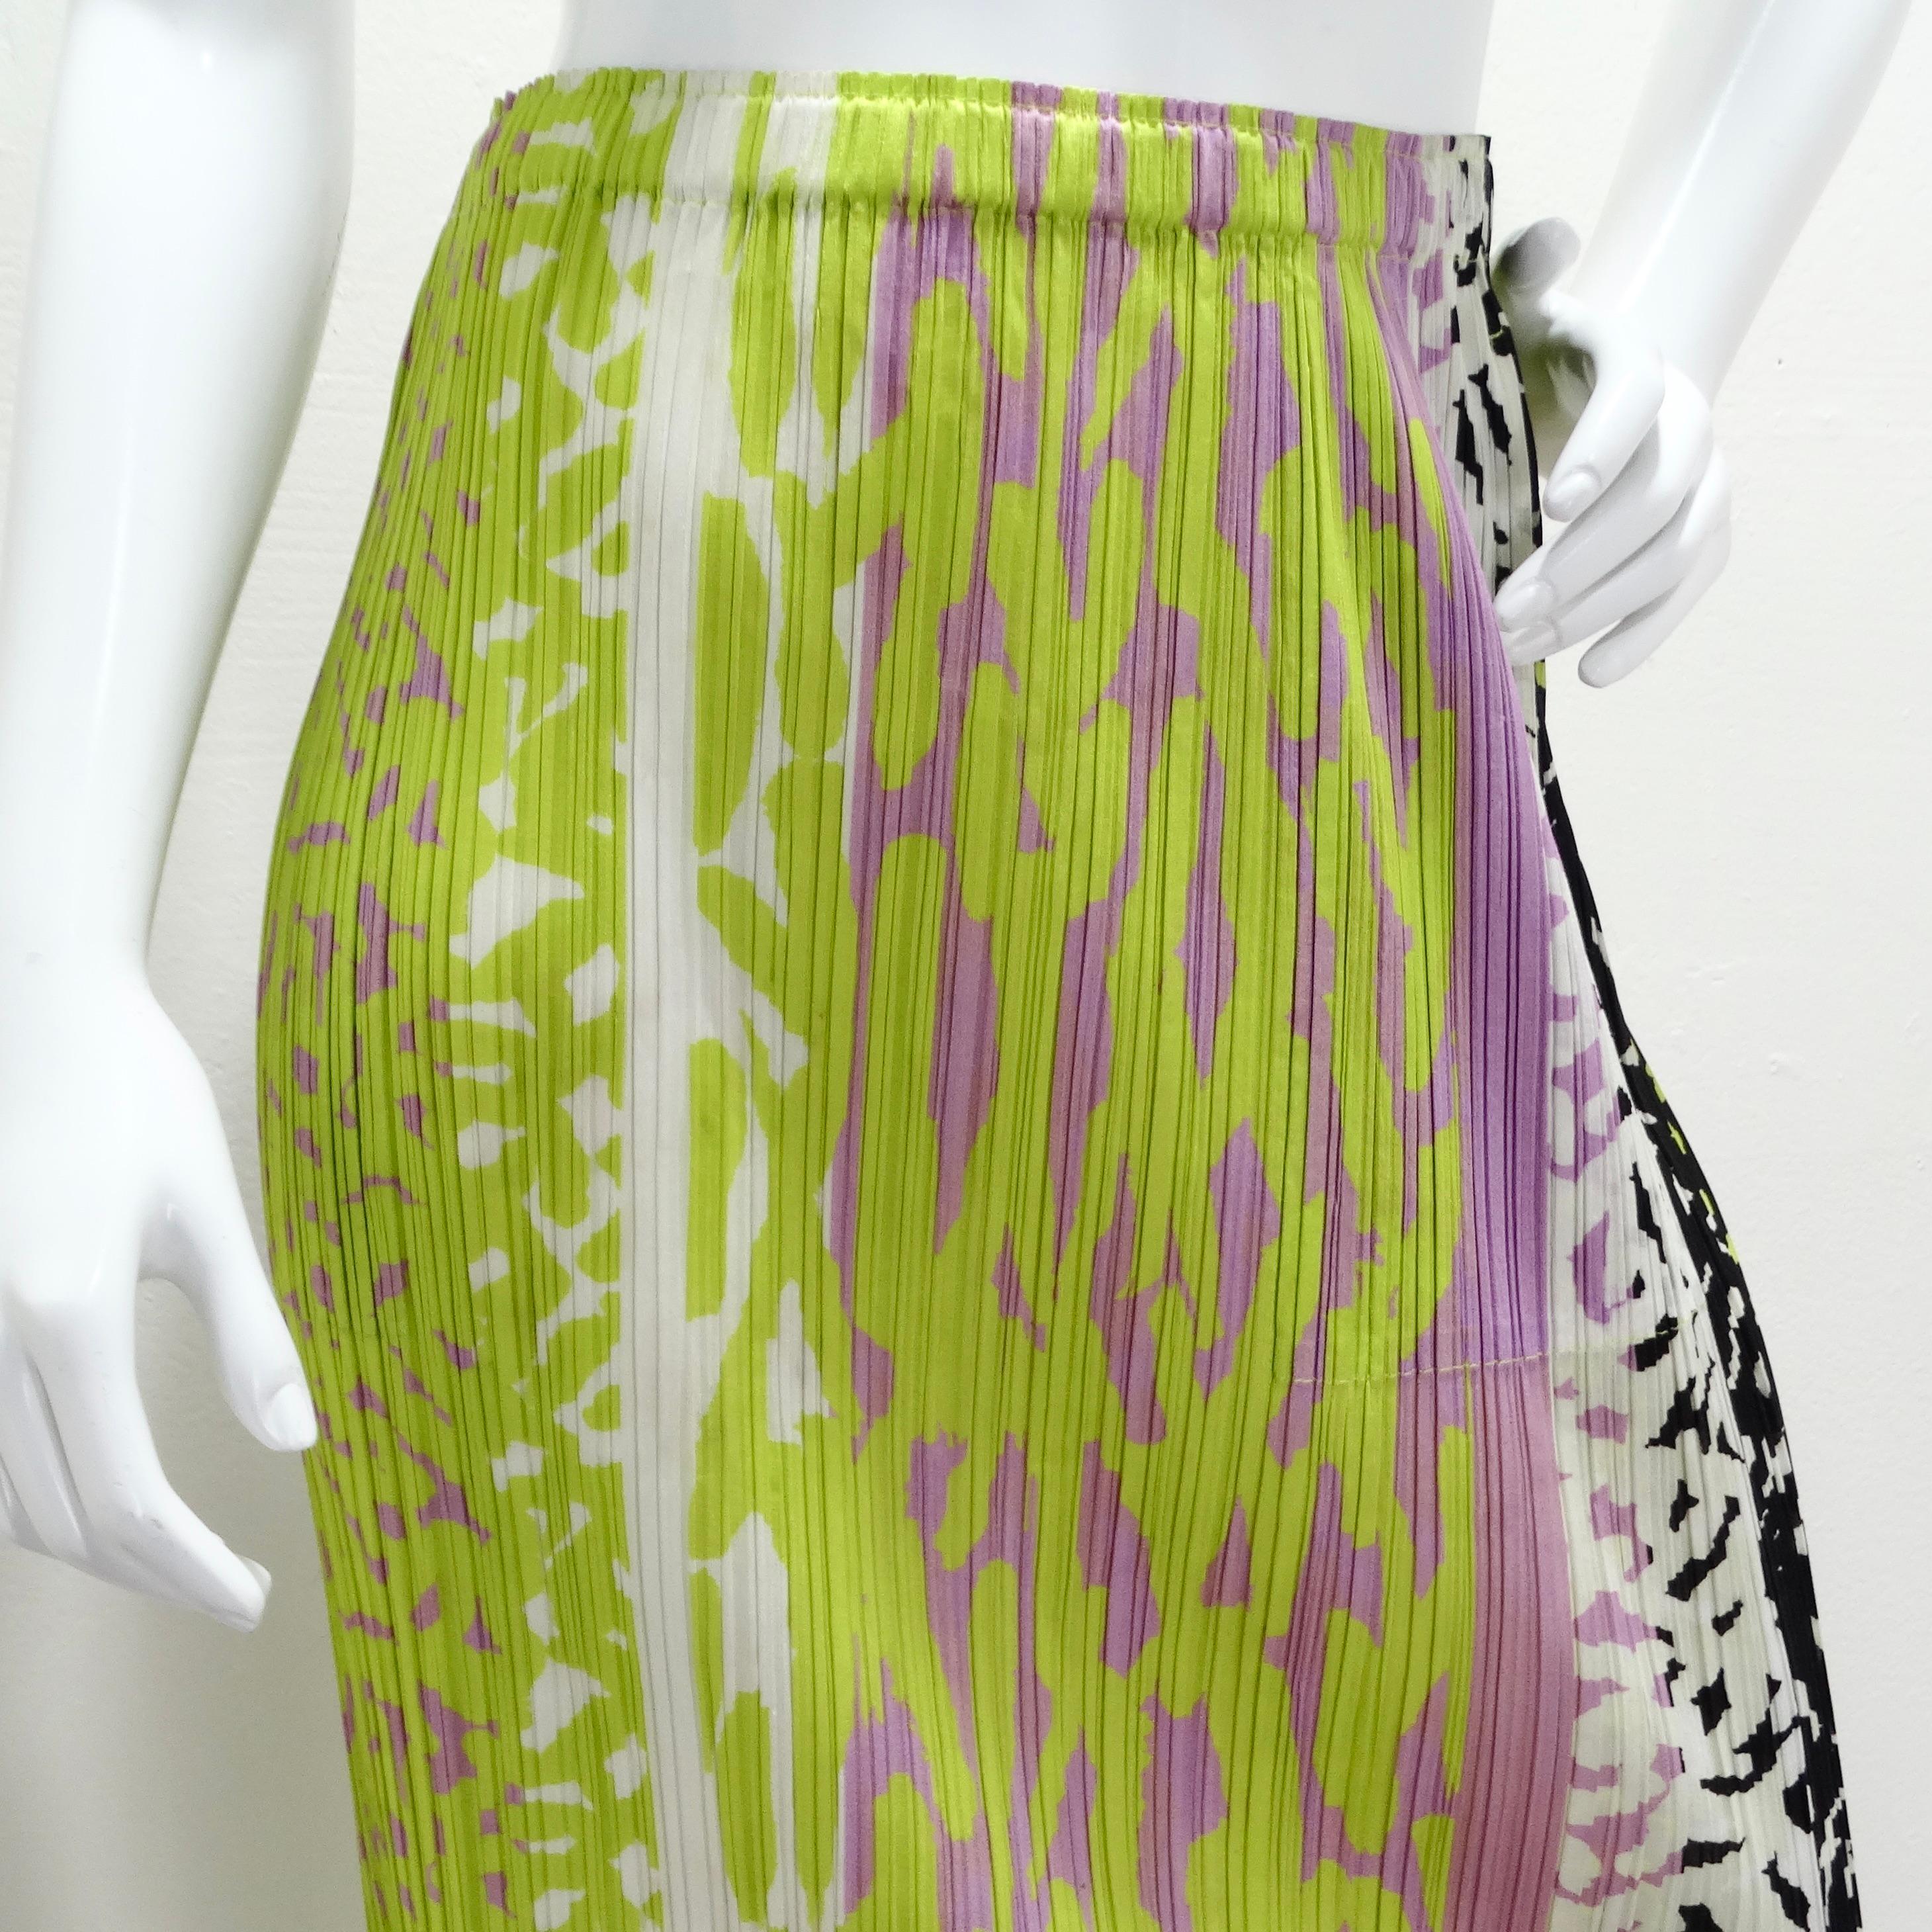 The Issey Miyake 1990s Pleats Please Multicolor Midi Skirt is a vibrant and playful piece that showcases the designer's signature pleating technique. This eye-catching midi skirt features a lively patchwork pattern in purple, green, black, and